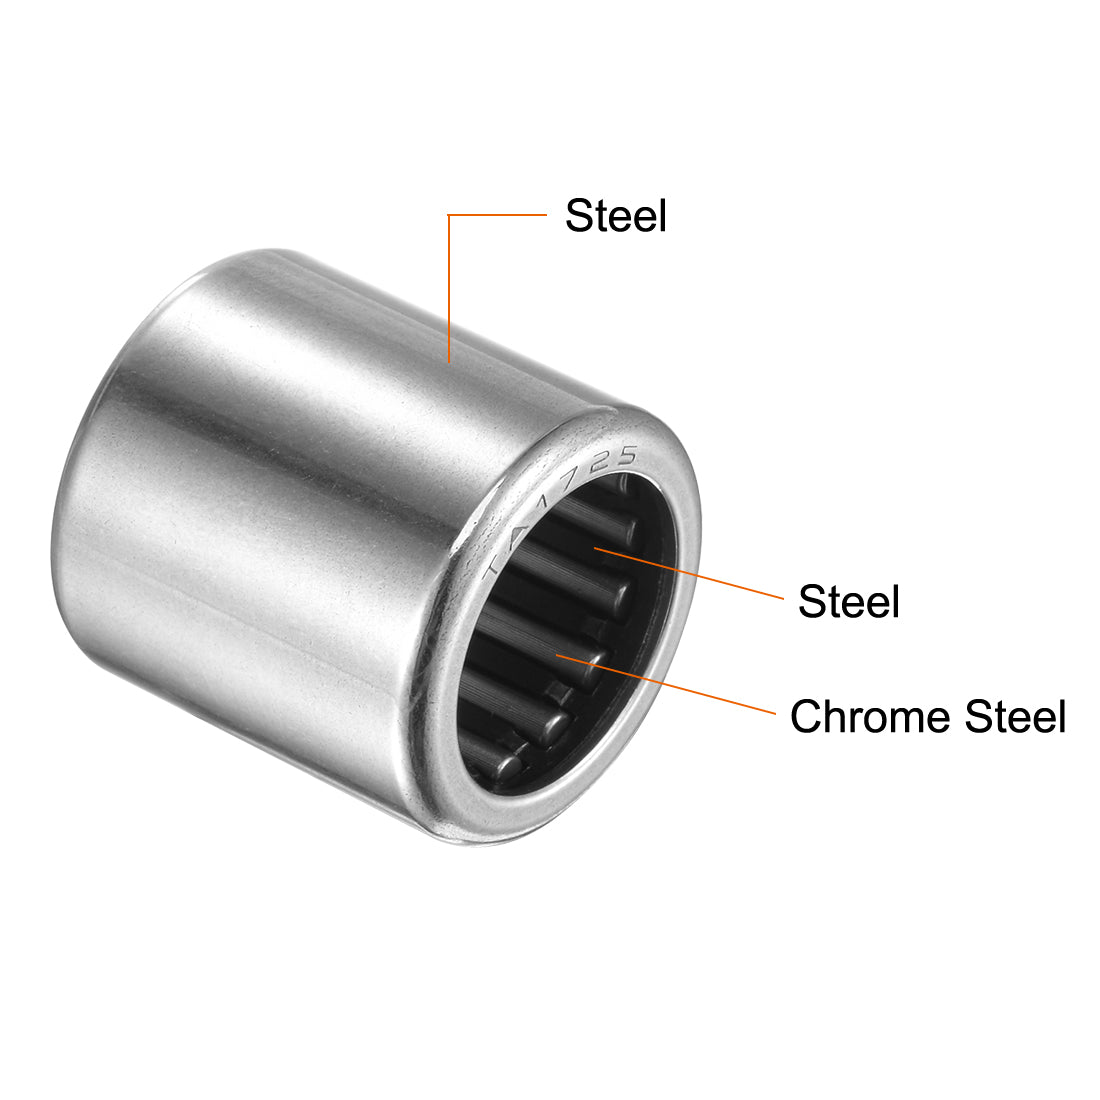 uxcell Uxcell TA1725 Needle Roller Bearings 17mm x 24mm x 25mm Chrome Steel Open End 2pcs